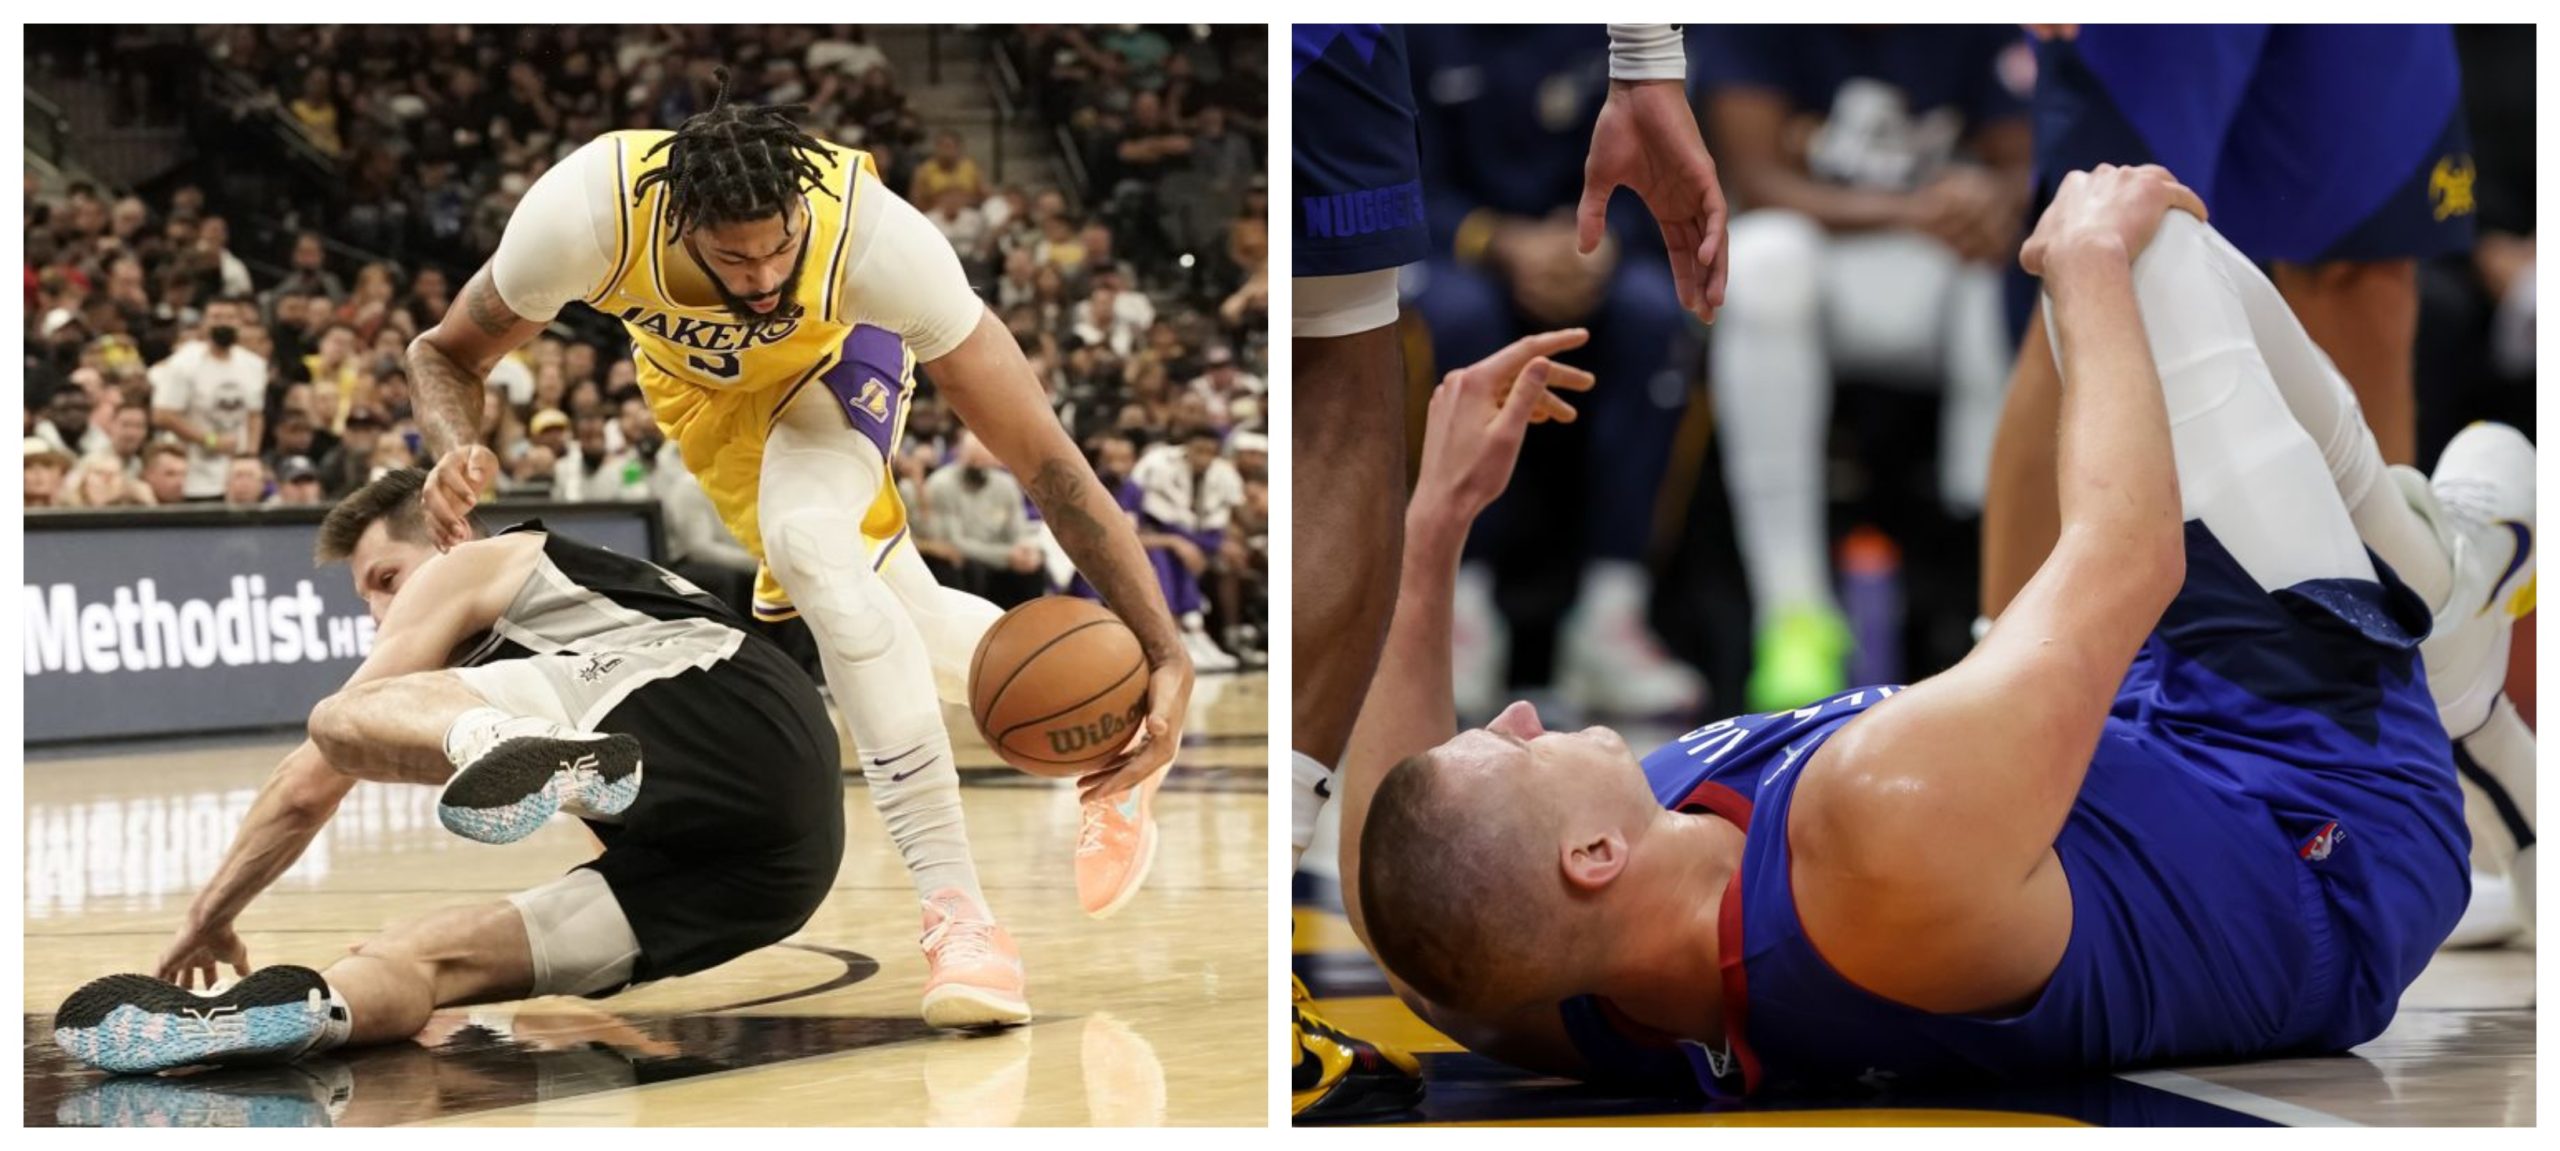 Nikola Jokic and Anthony Davis suffer injuries during contests against Jazz and Spurs respectively - THE SPORTS ROOM